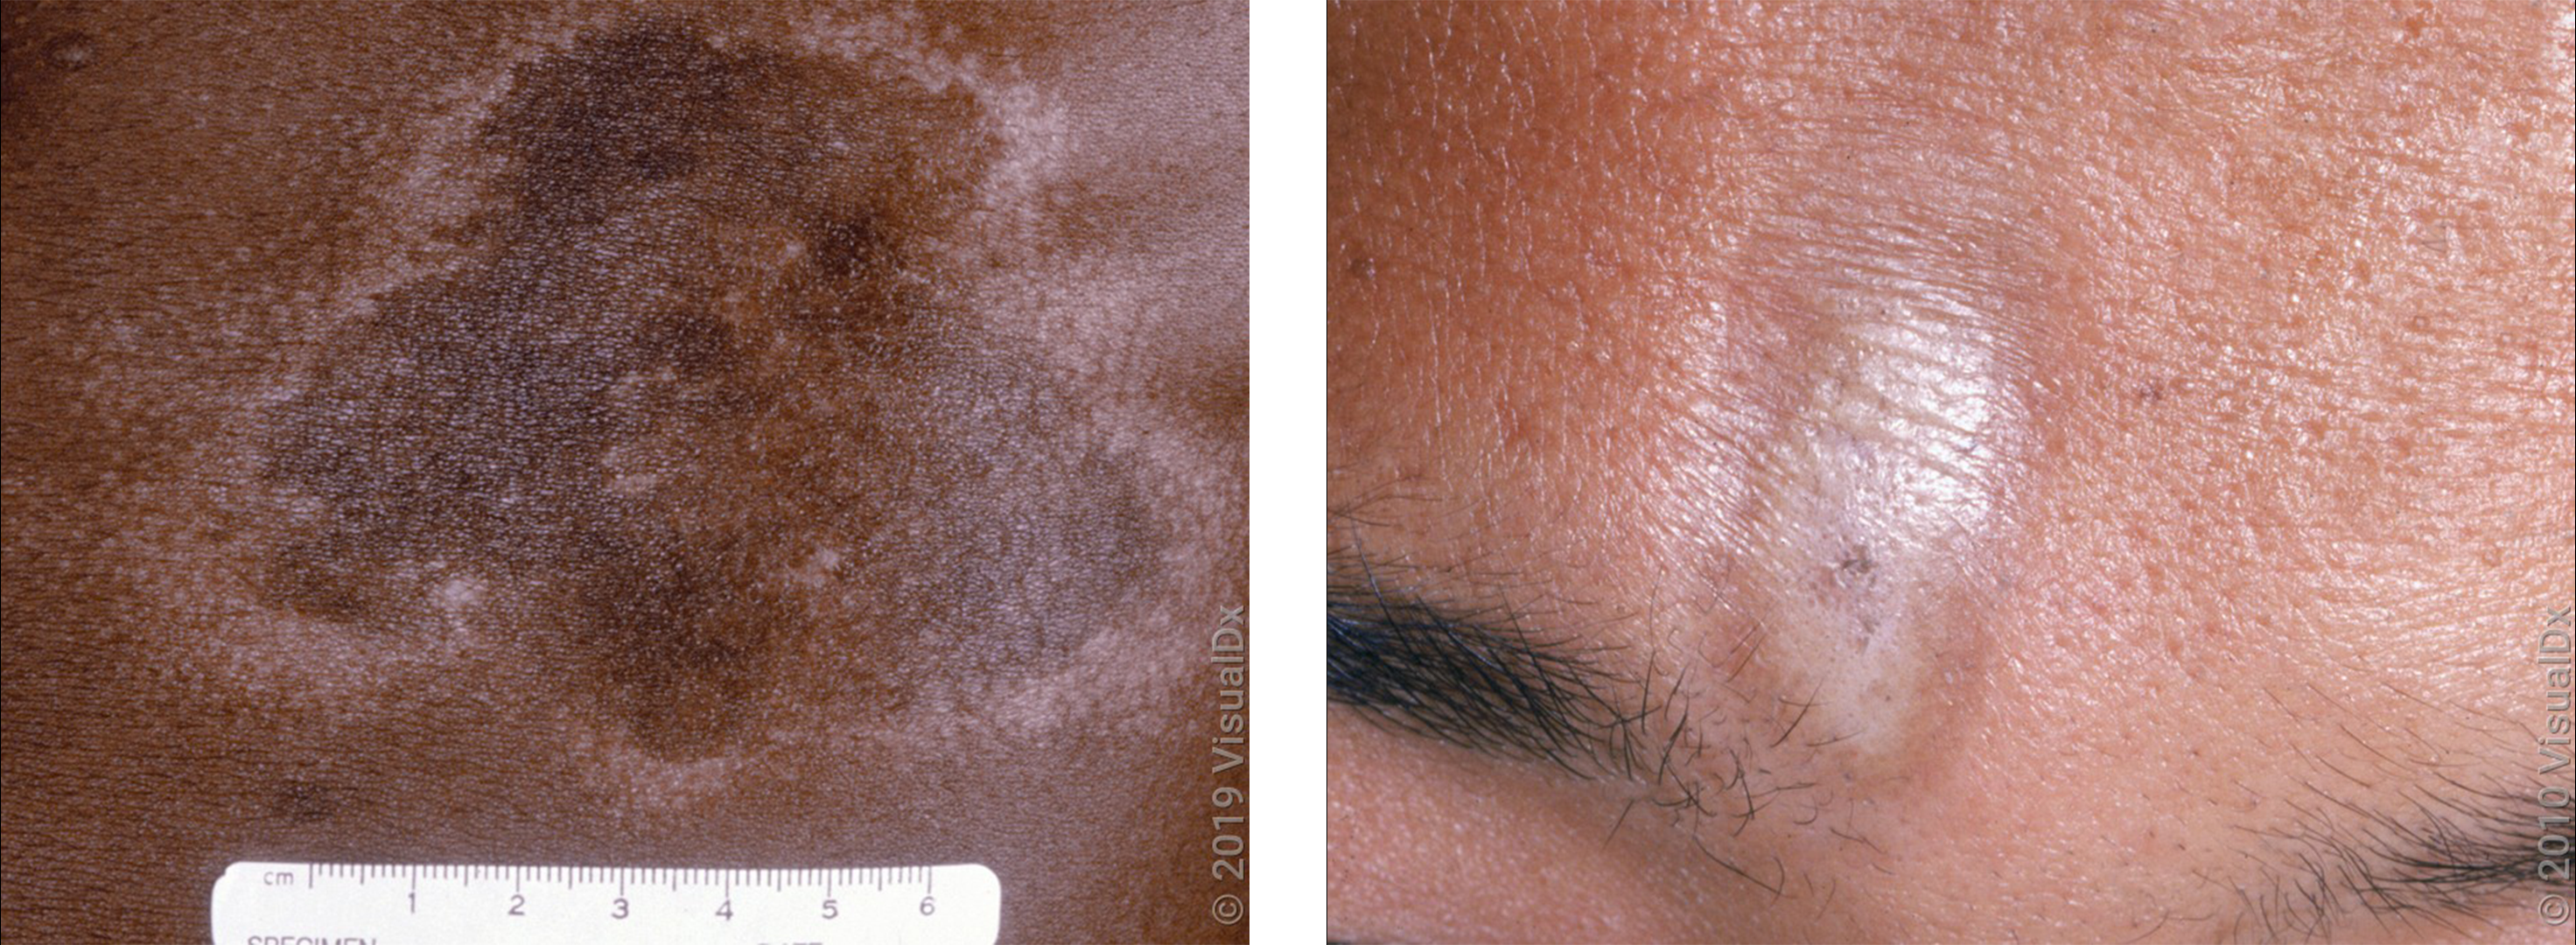 Left: Close-up of a brown and white patch on the skin in morphea. Right: A shiny white patch on the forehead in morphea.